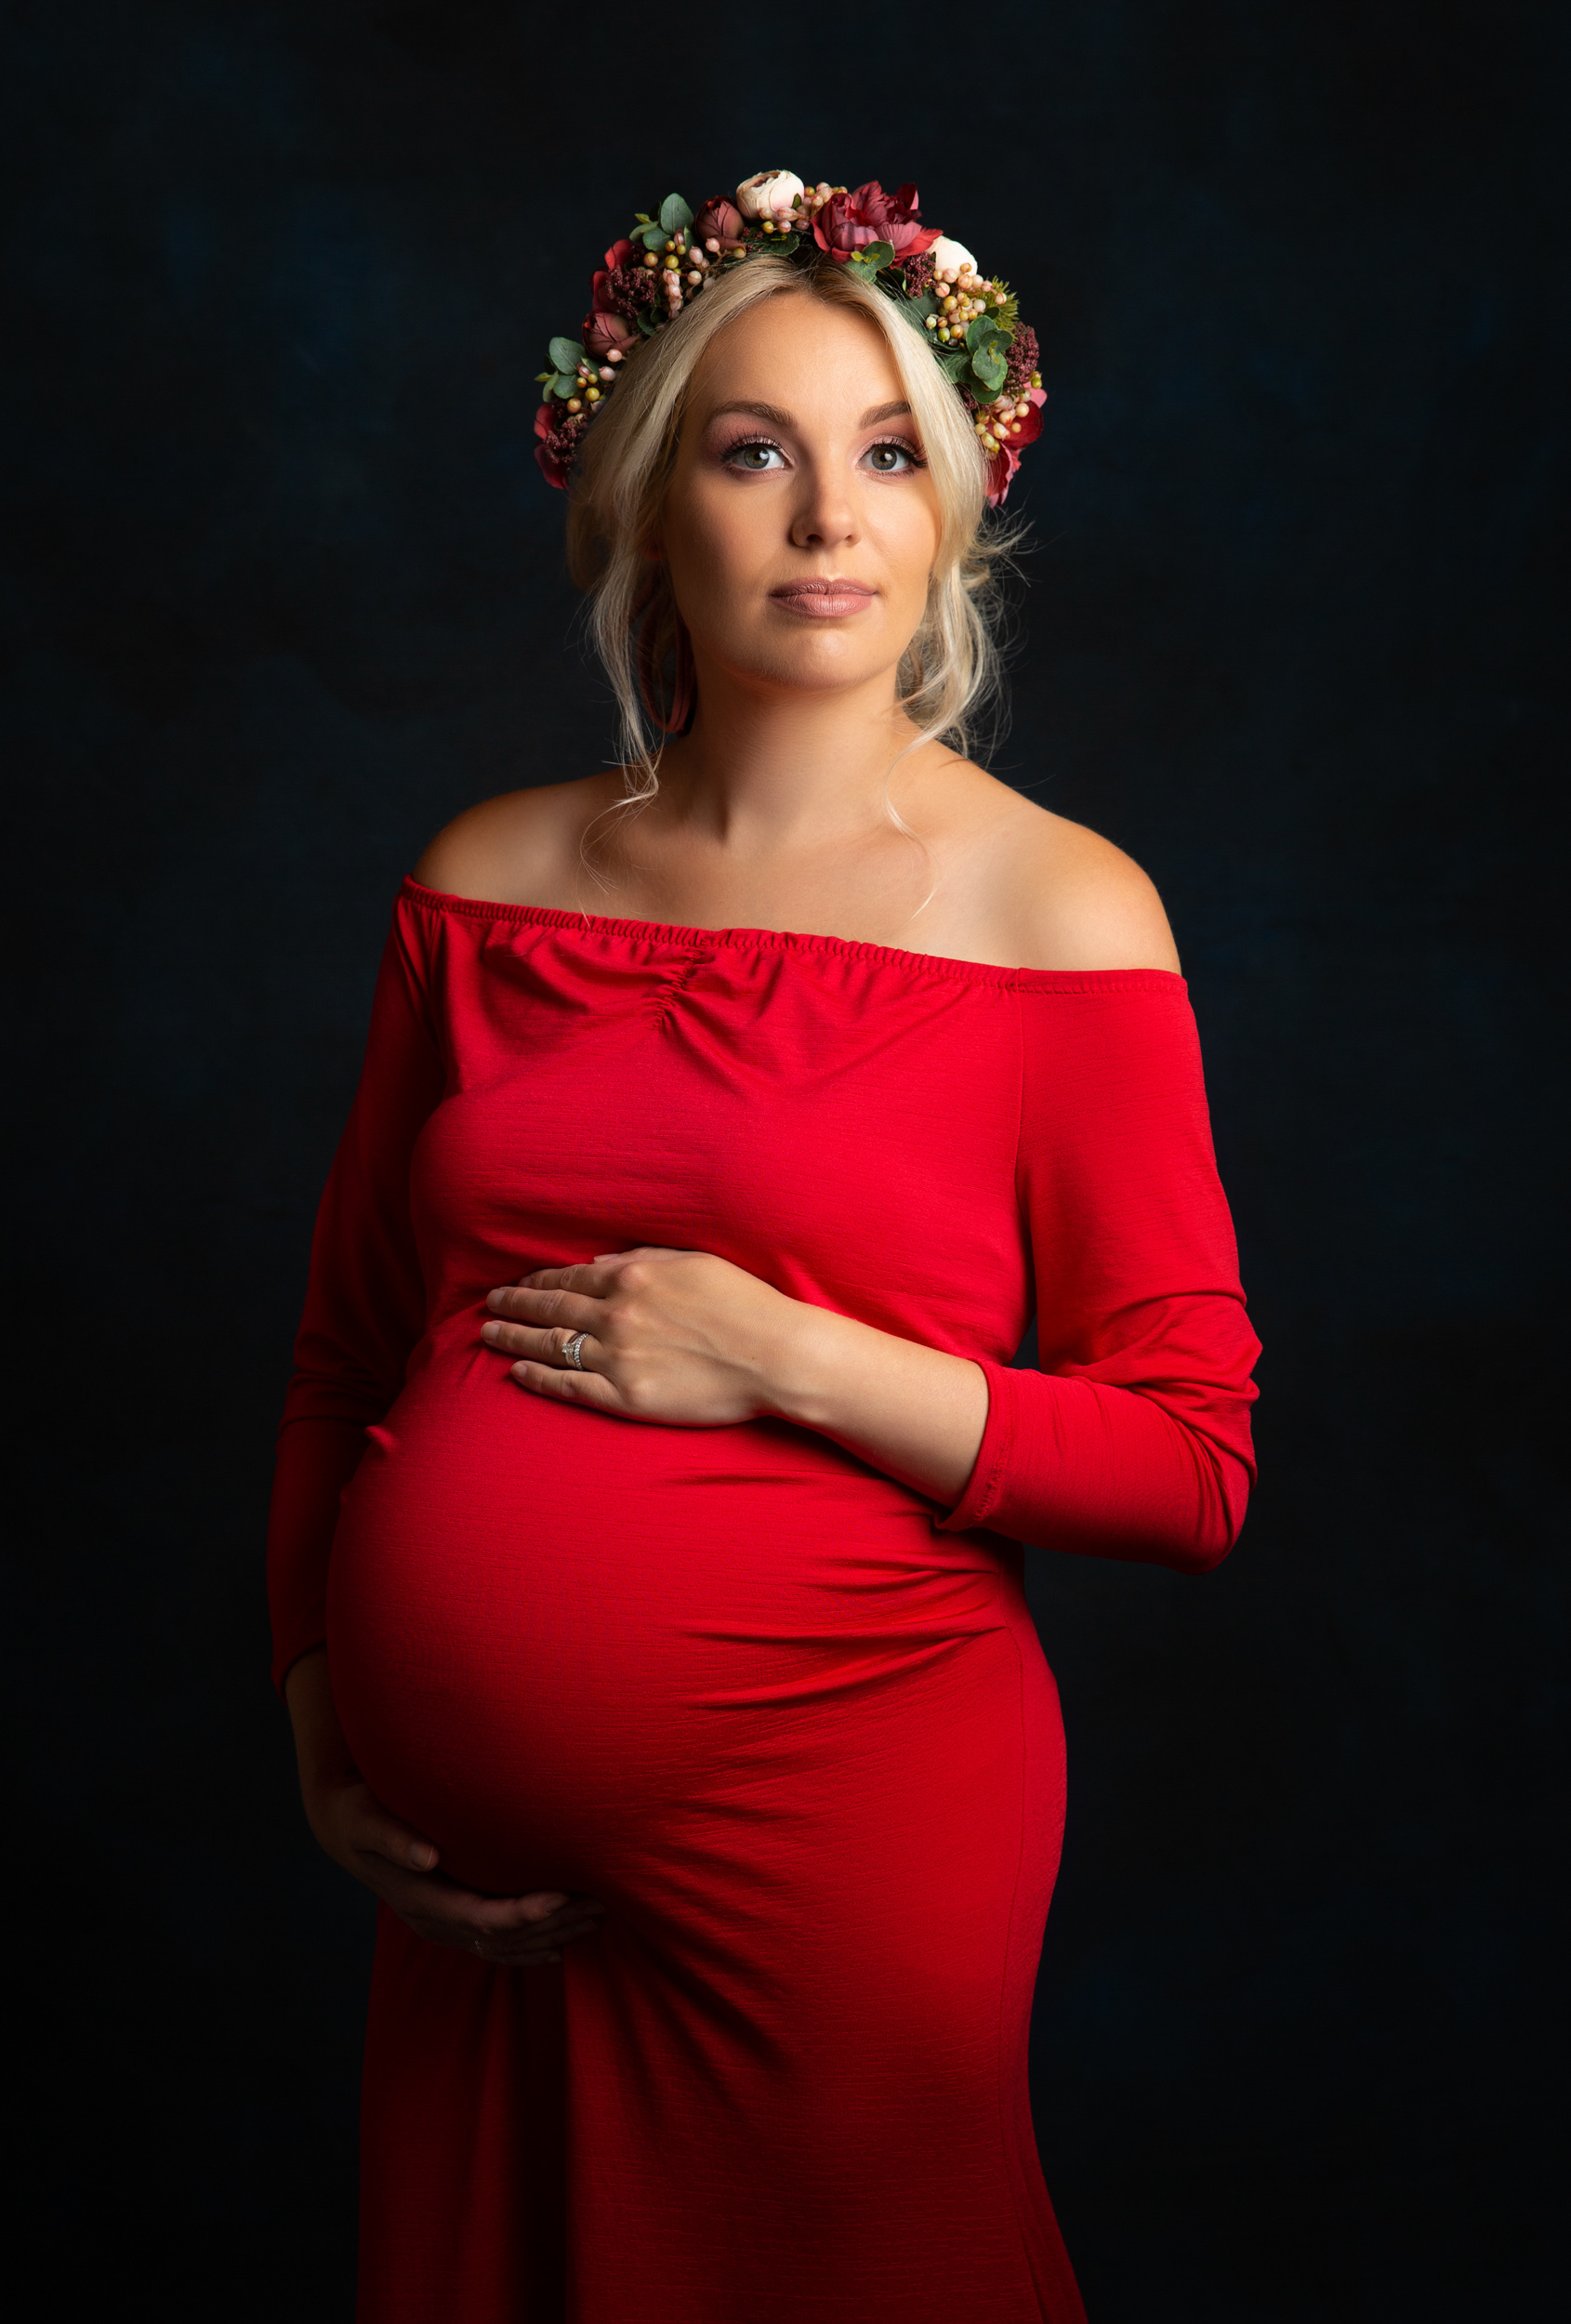 Beautiful pregnant lady in a bright red dress with floral headband at her maternity photo shoot in Sandbach, Cheshire